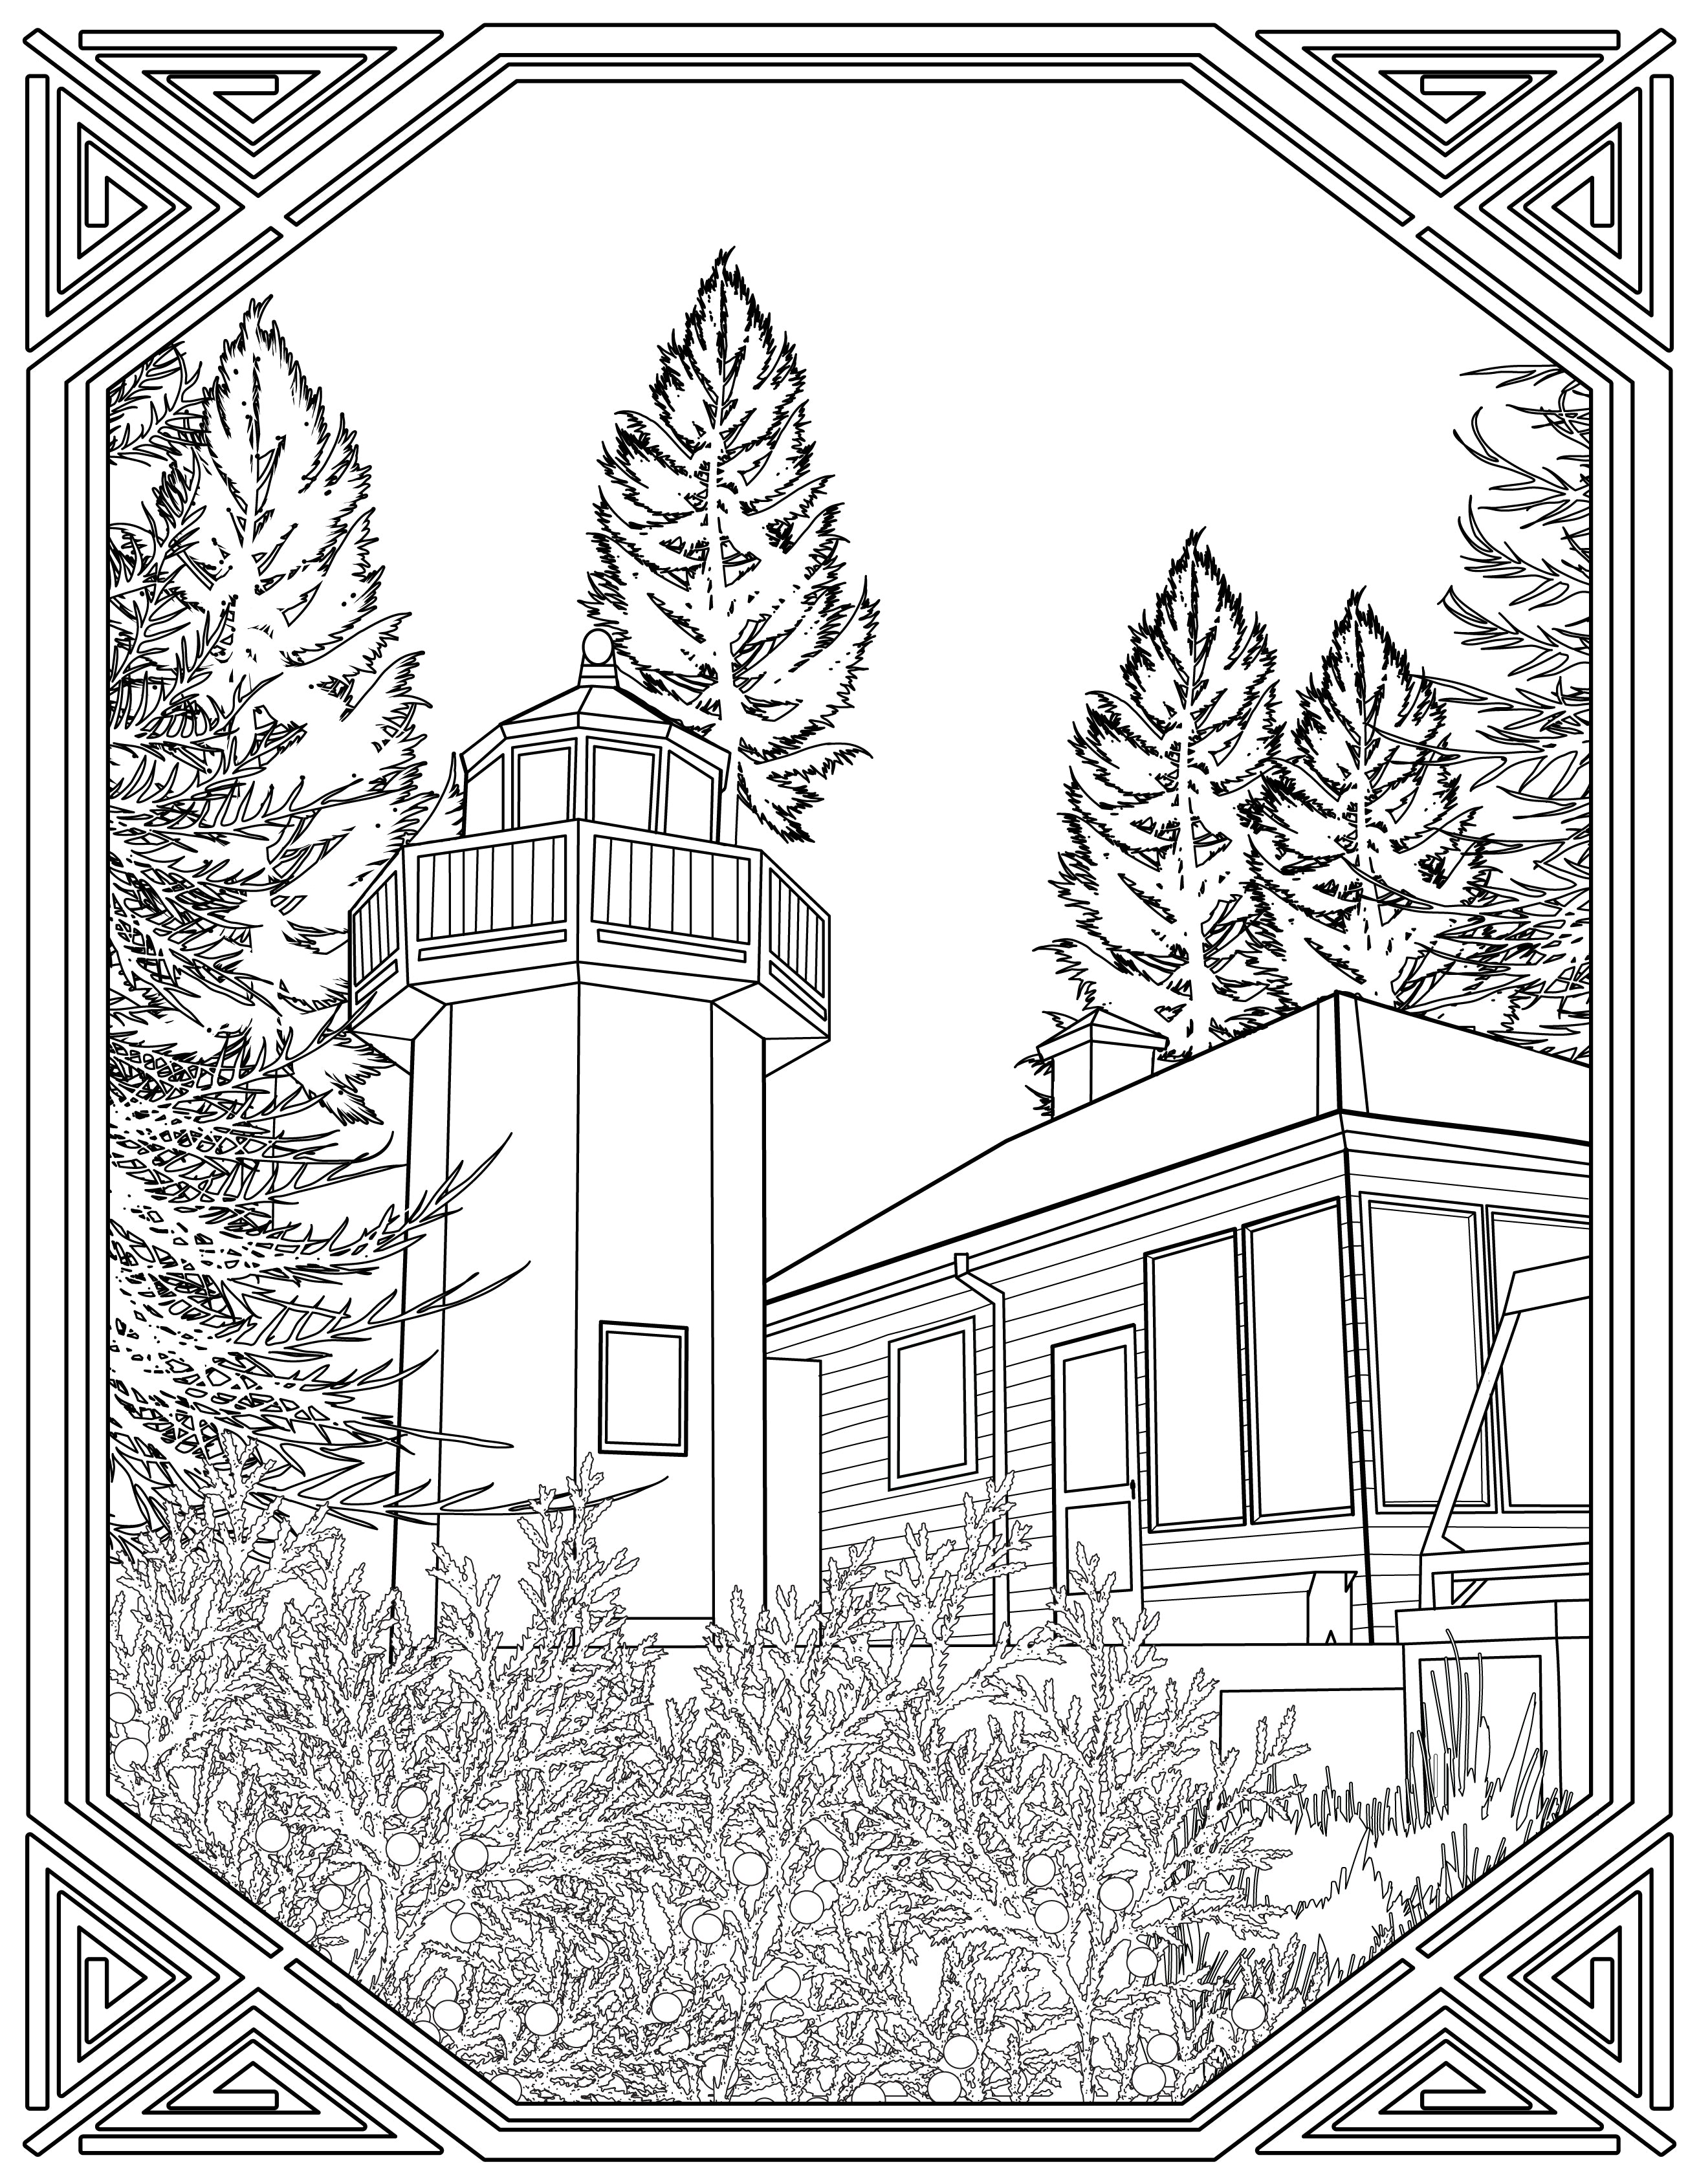 Single Coloring Book Page - Skunk Bay Lighthouse, Washington - Digital Print-from-Home